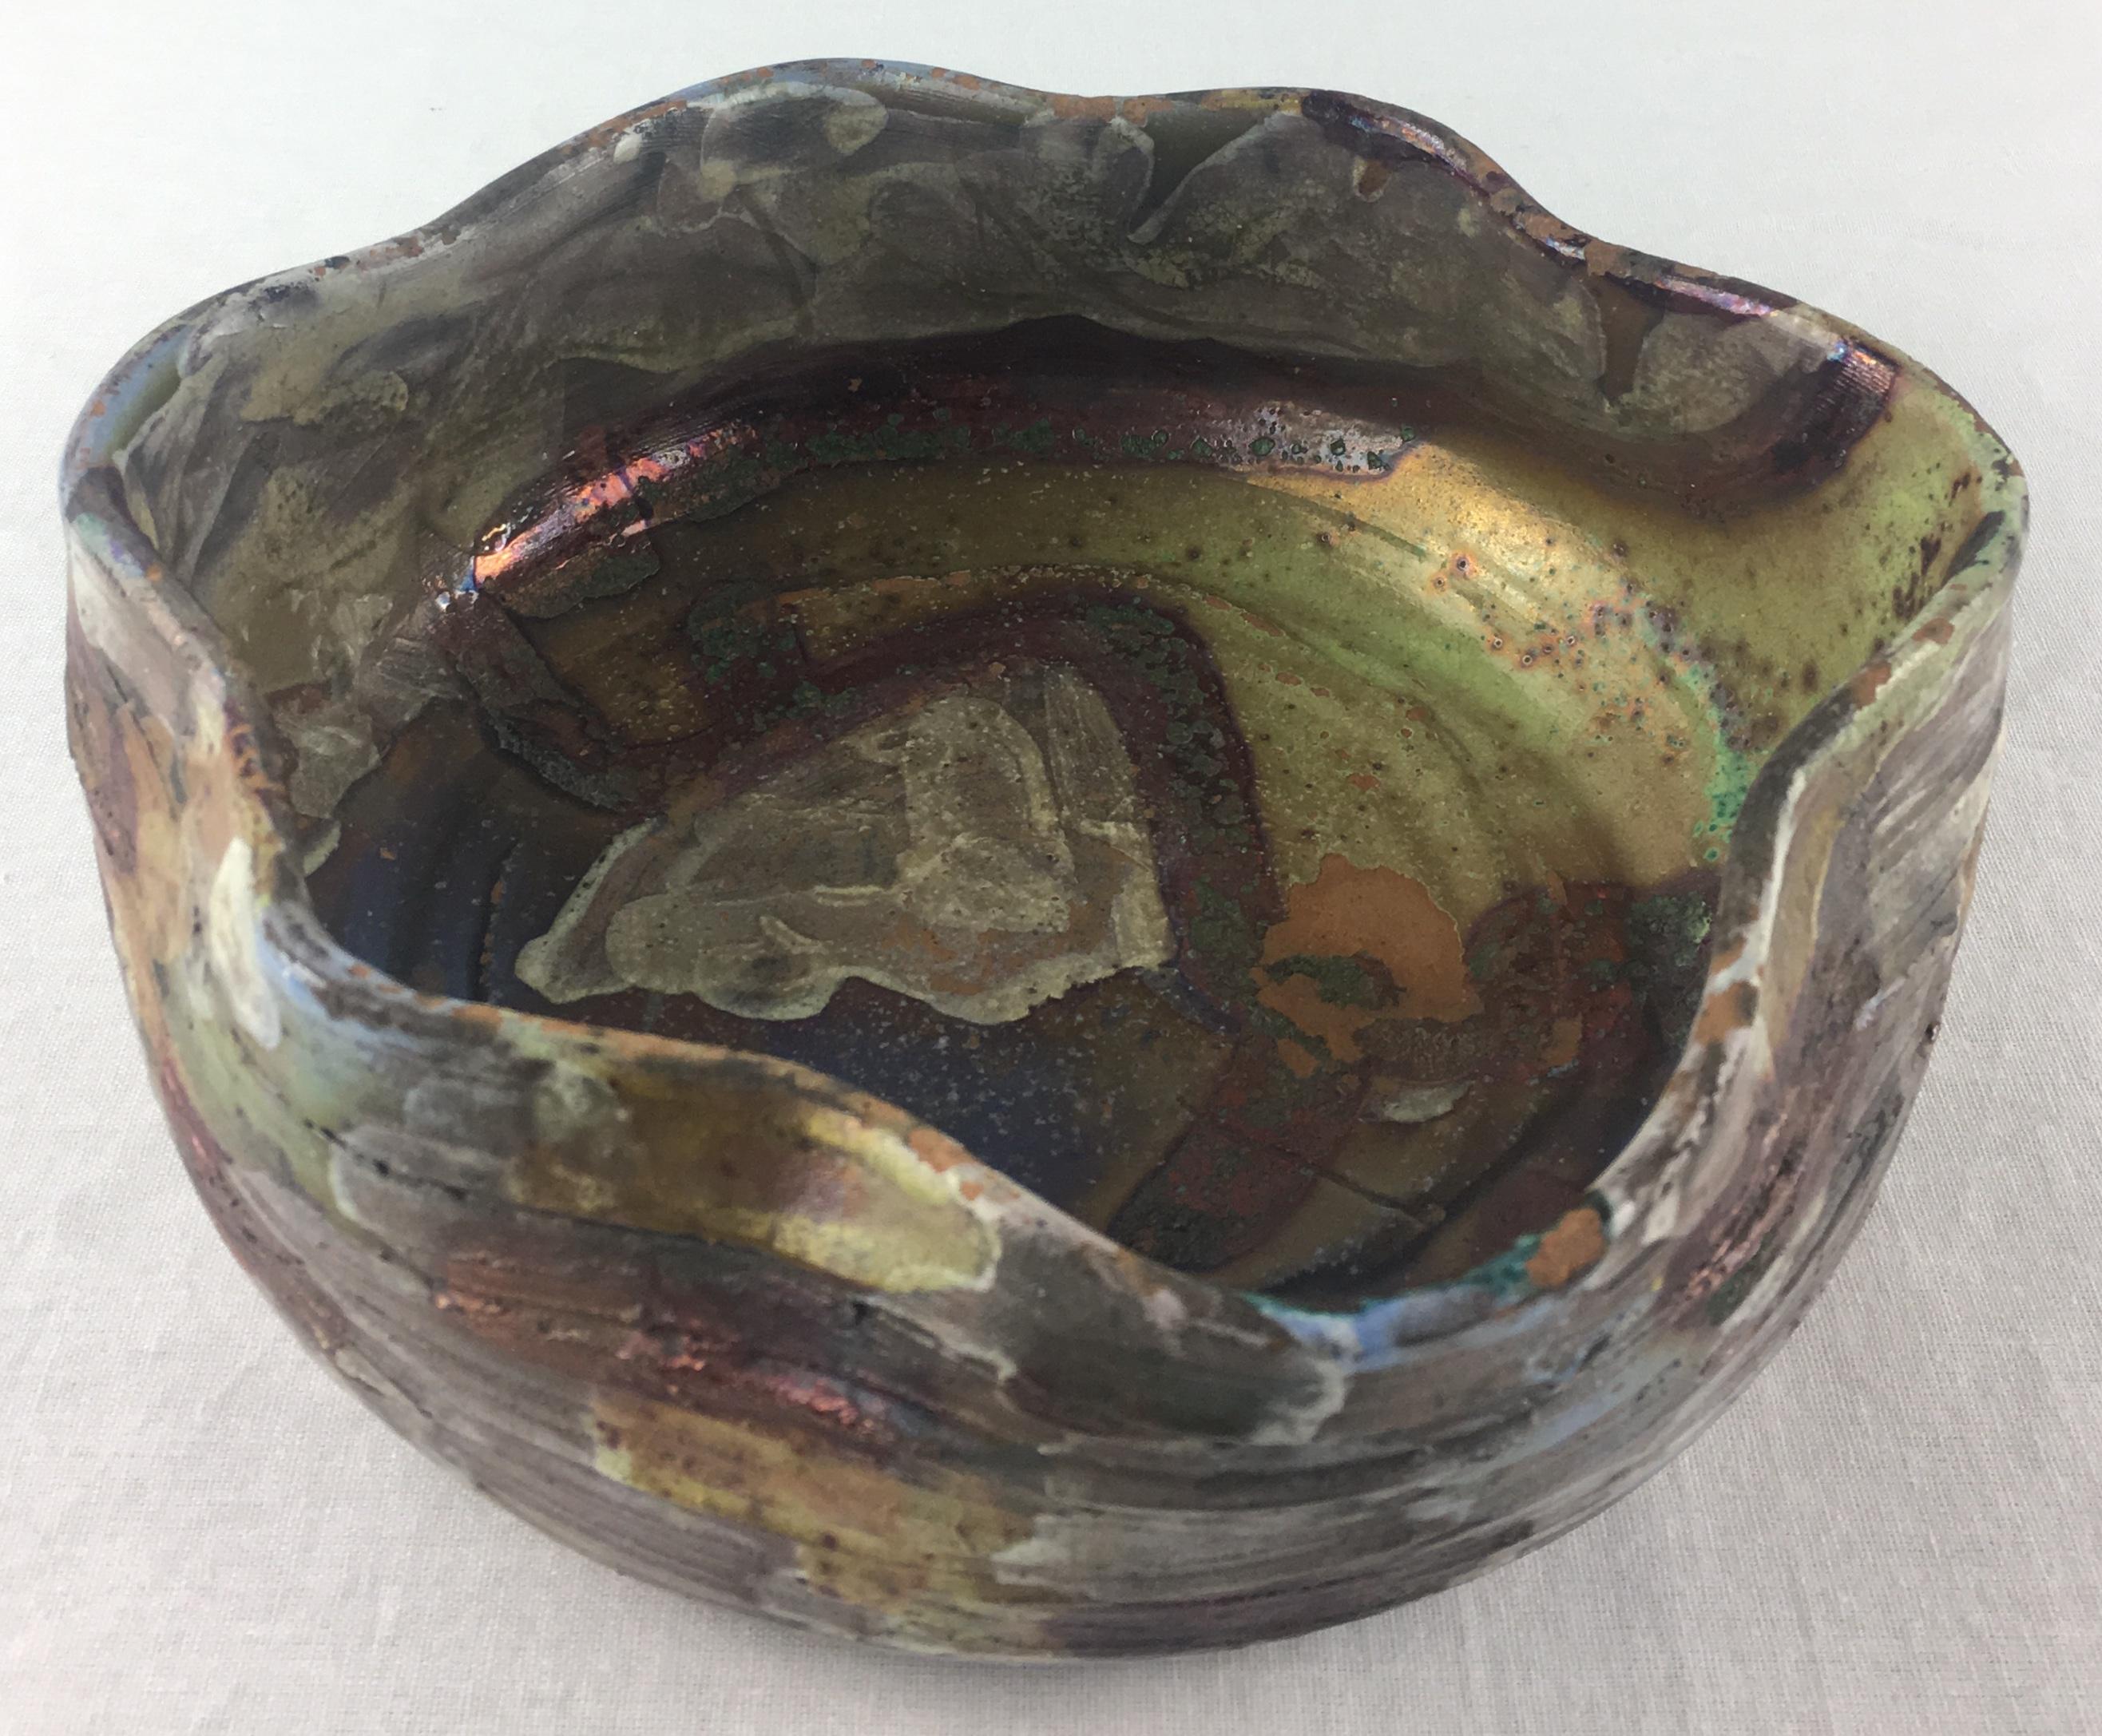 Beautiful mid-20th Century French metallic glaze bowl or vide poche possibly from Vallauris or Biot, France. The prominent colors in an art brut form make this metallic glaze bowl or vide poche particularly pleasing to the eye.

Would look great on